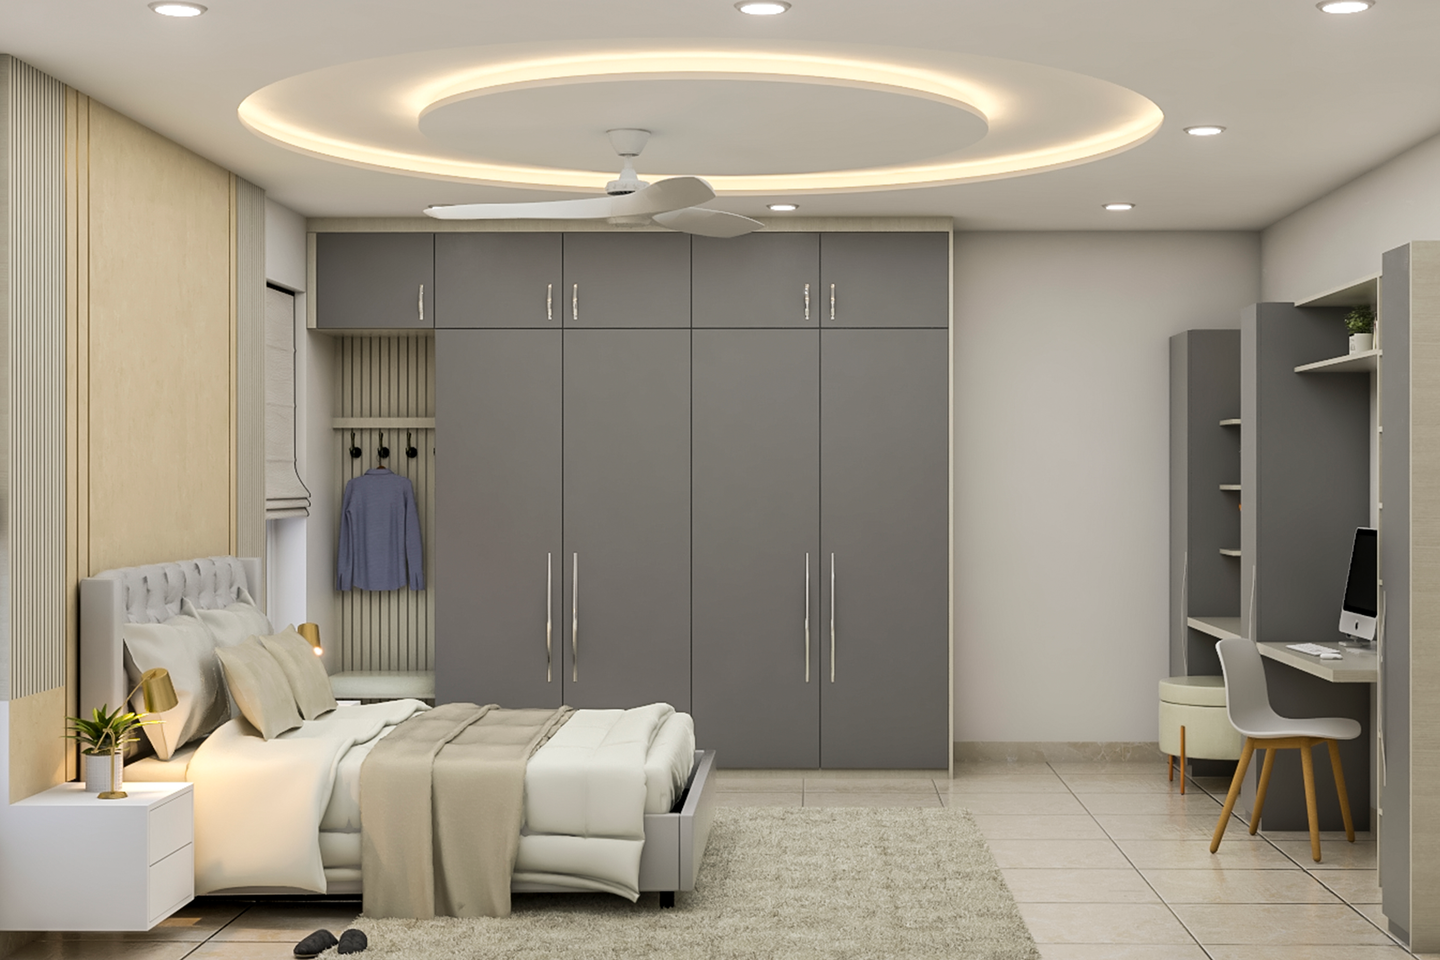 Contemporary Single-Layered False Ceiling Design WIth Cove And Recessed Lights